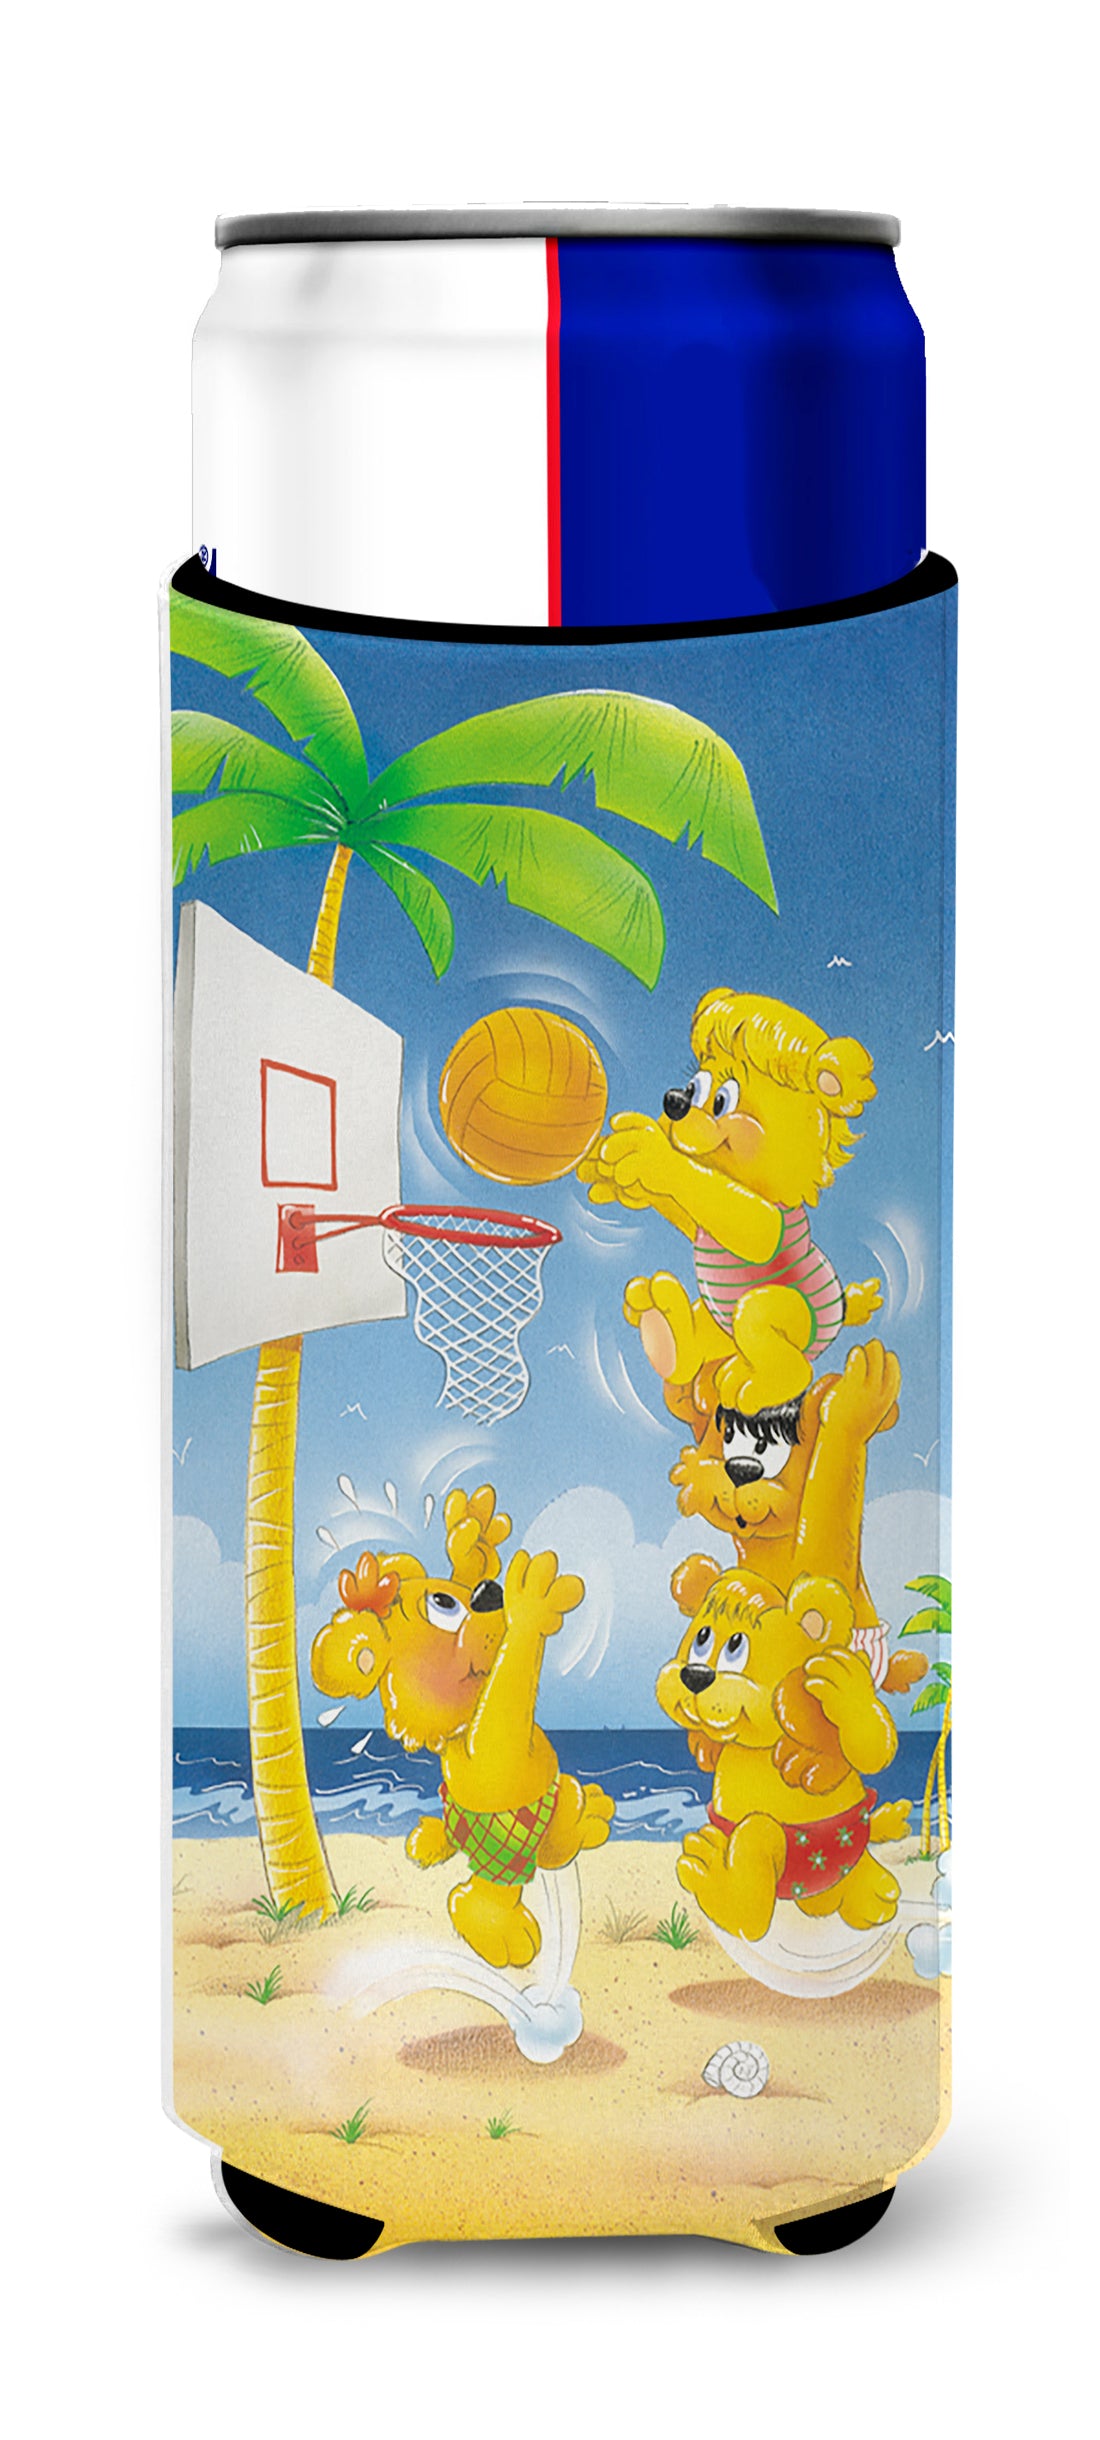 Bears playing Basketball  Ultra Beverage Insulators for slim cans APH0388MUK  the-store.com.